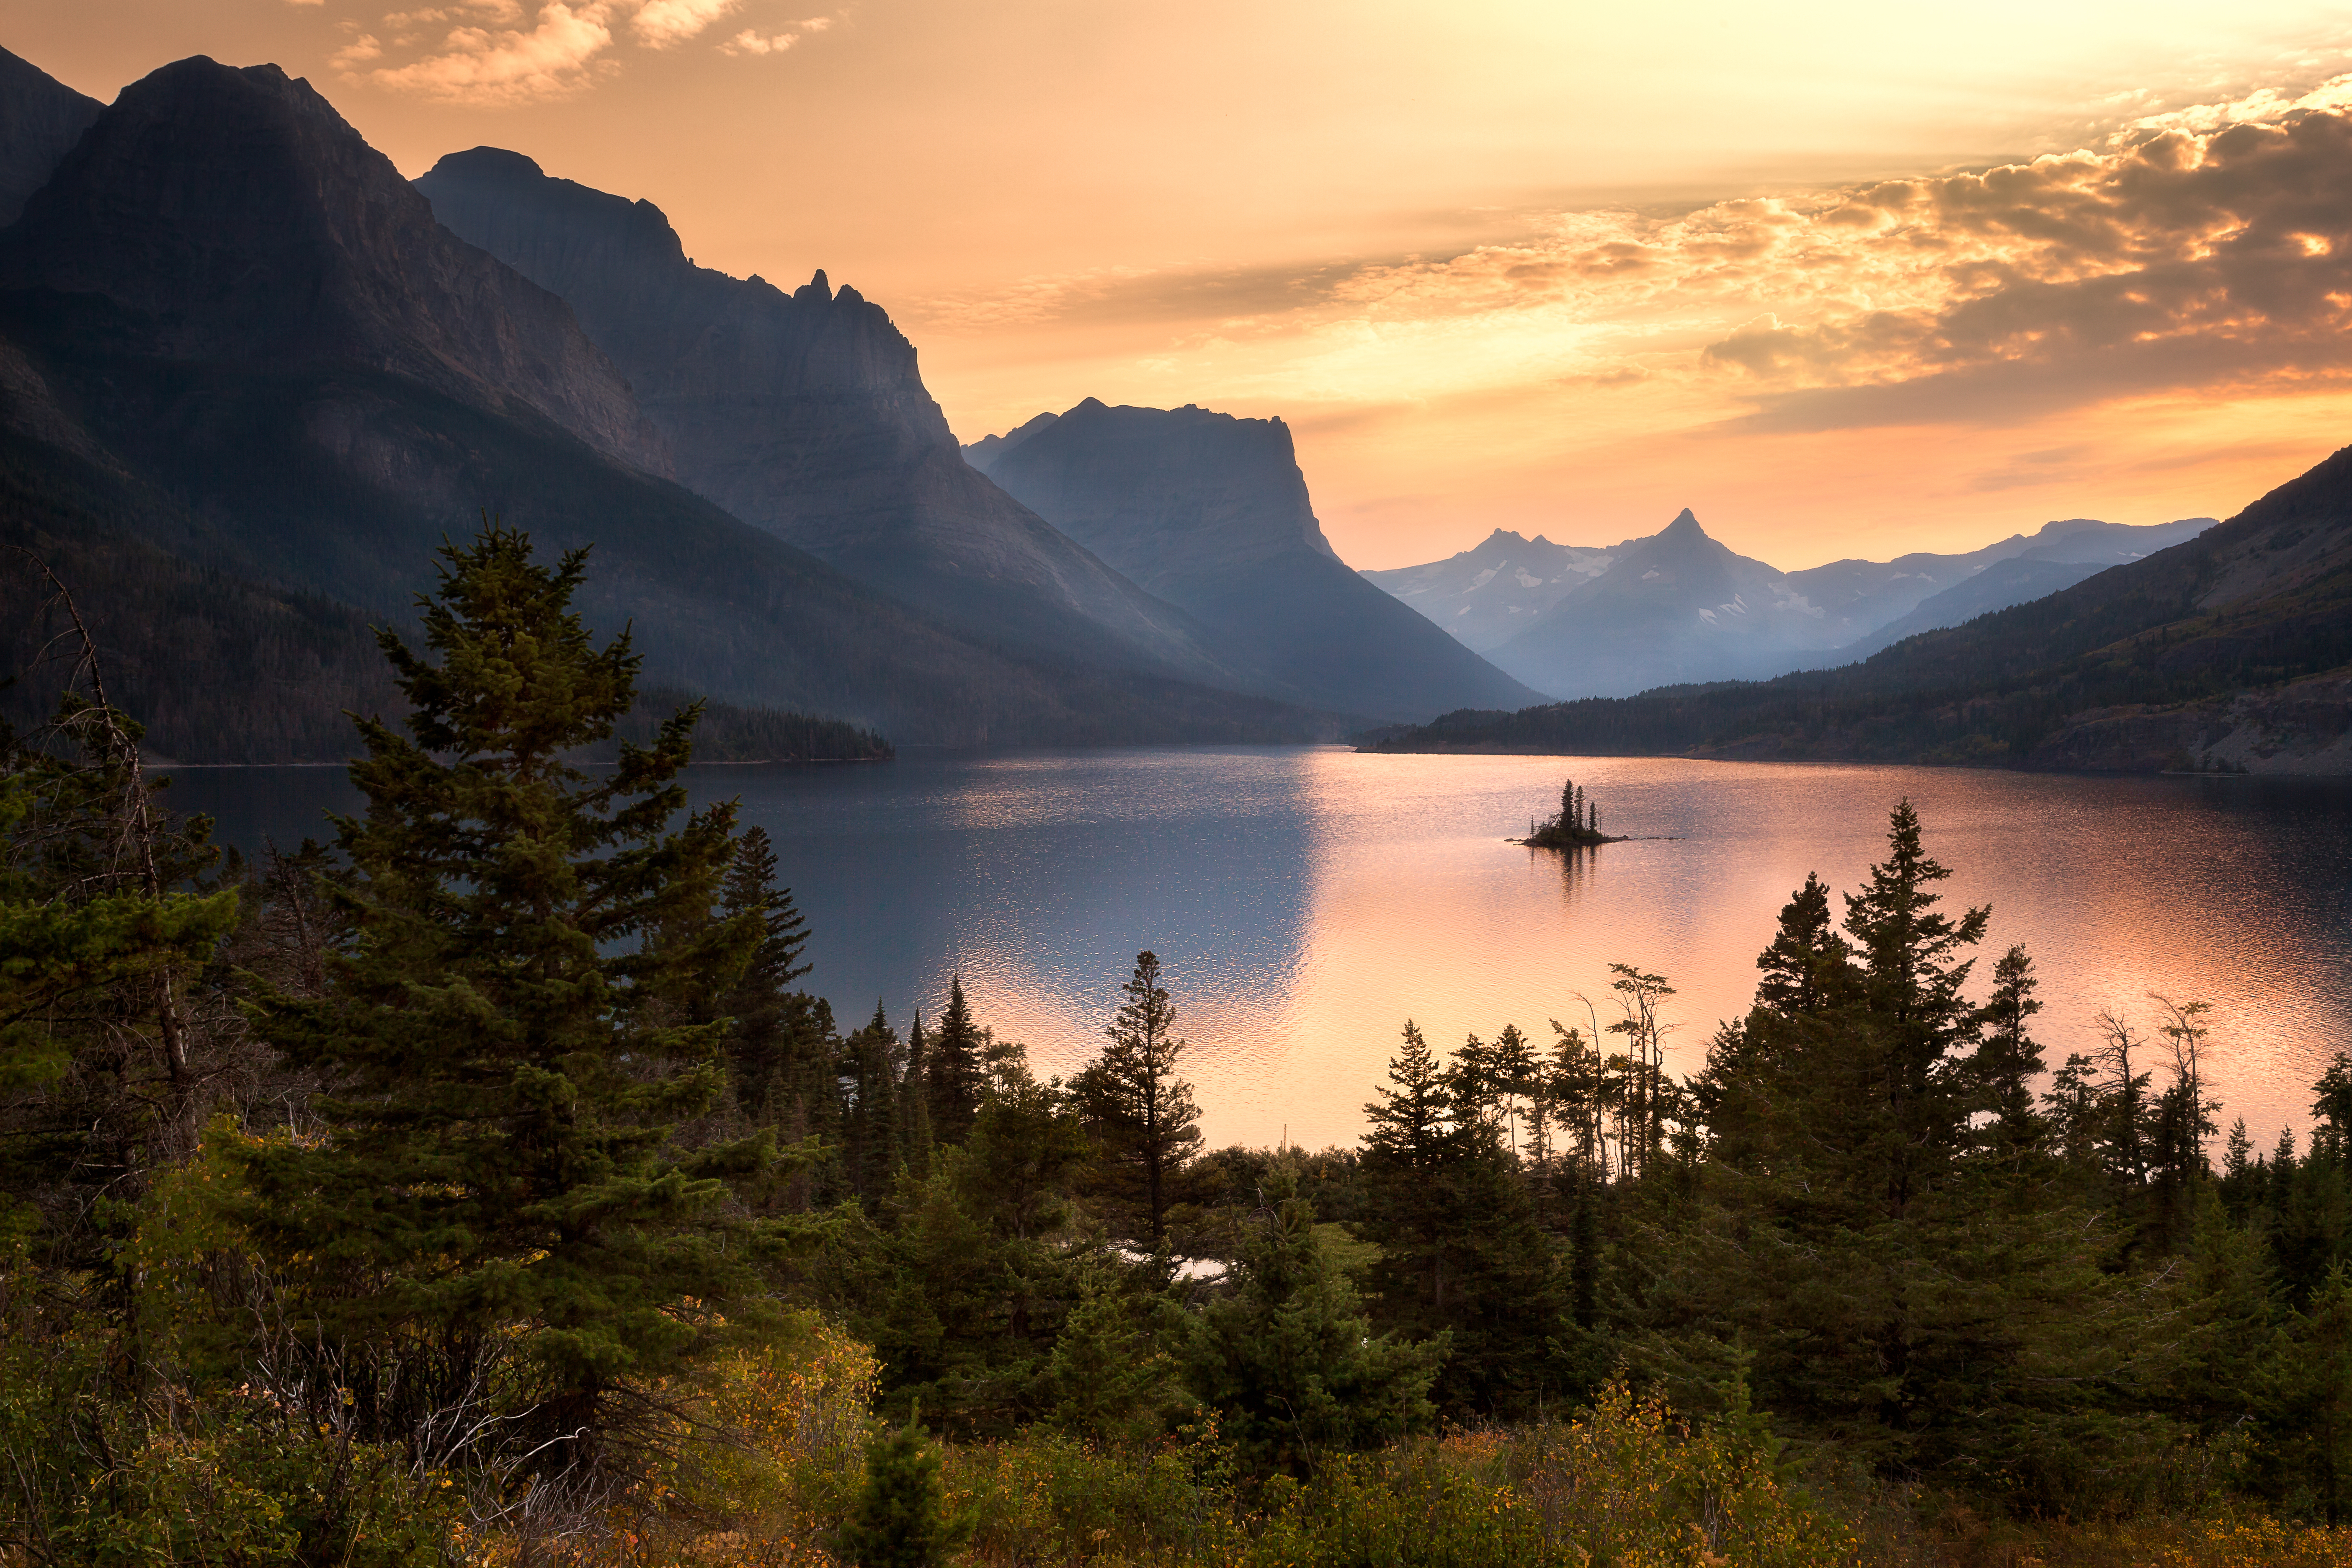 Wild Goose Island in Saint Mary's Lake in Glacier National Park at sunset.